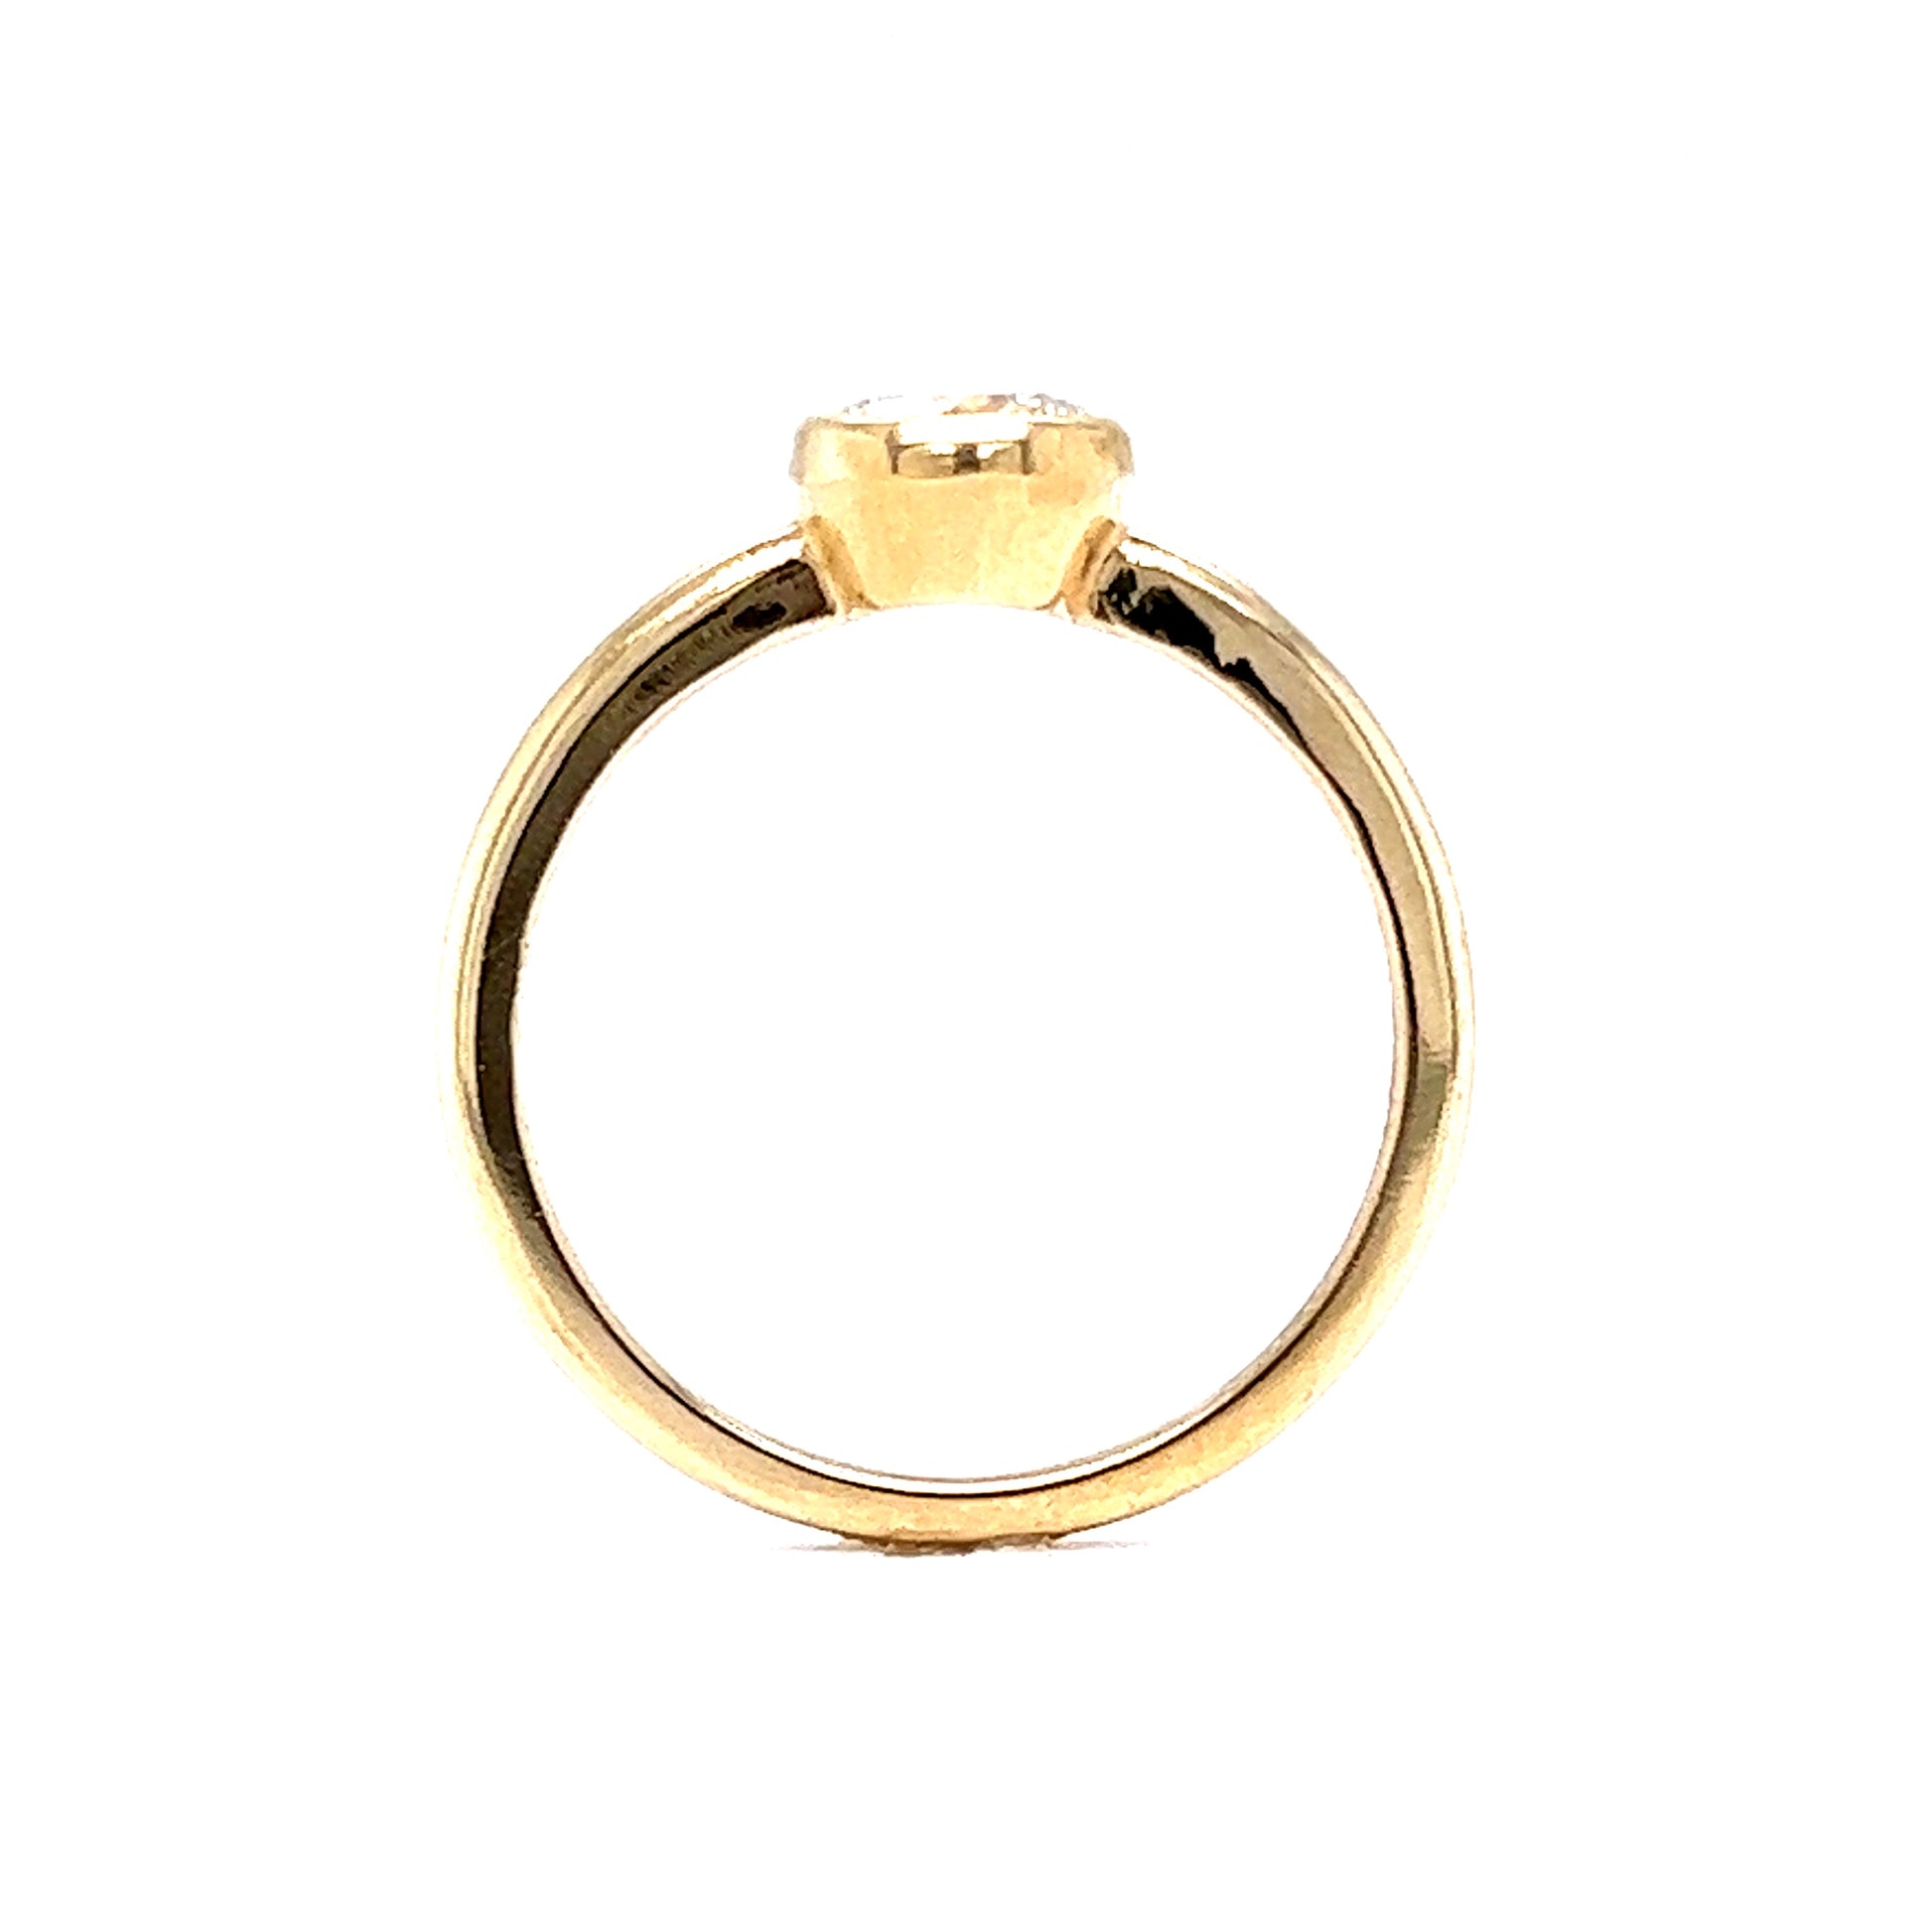 .72 Round Brilliant Bezel Engagement Ring in 14k Yellow GoldComposition: 14 Karat Yellow GoldRing Size: 7.0Total Diamond Weight: .72 ctTotal Gram Weight: 2.5 gInscription: 14k